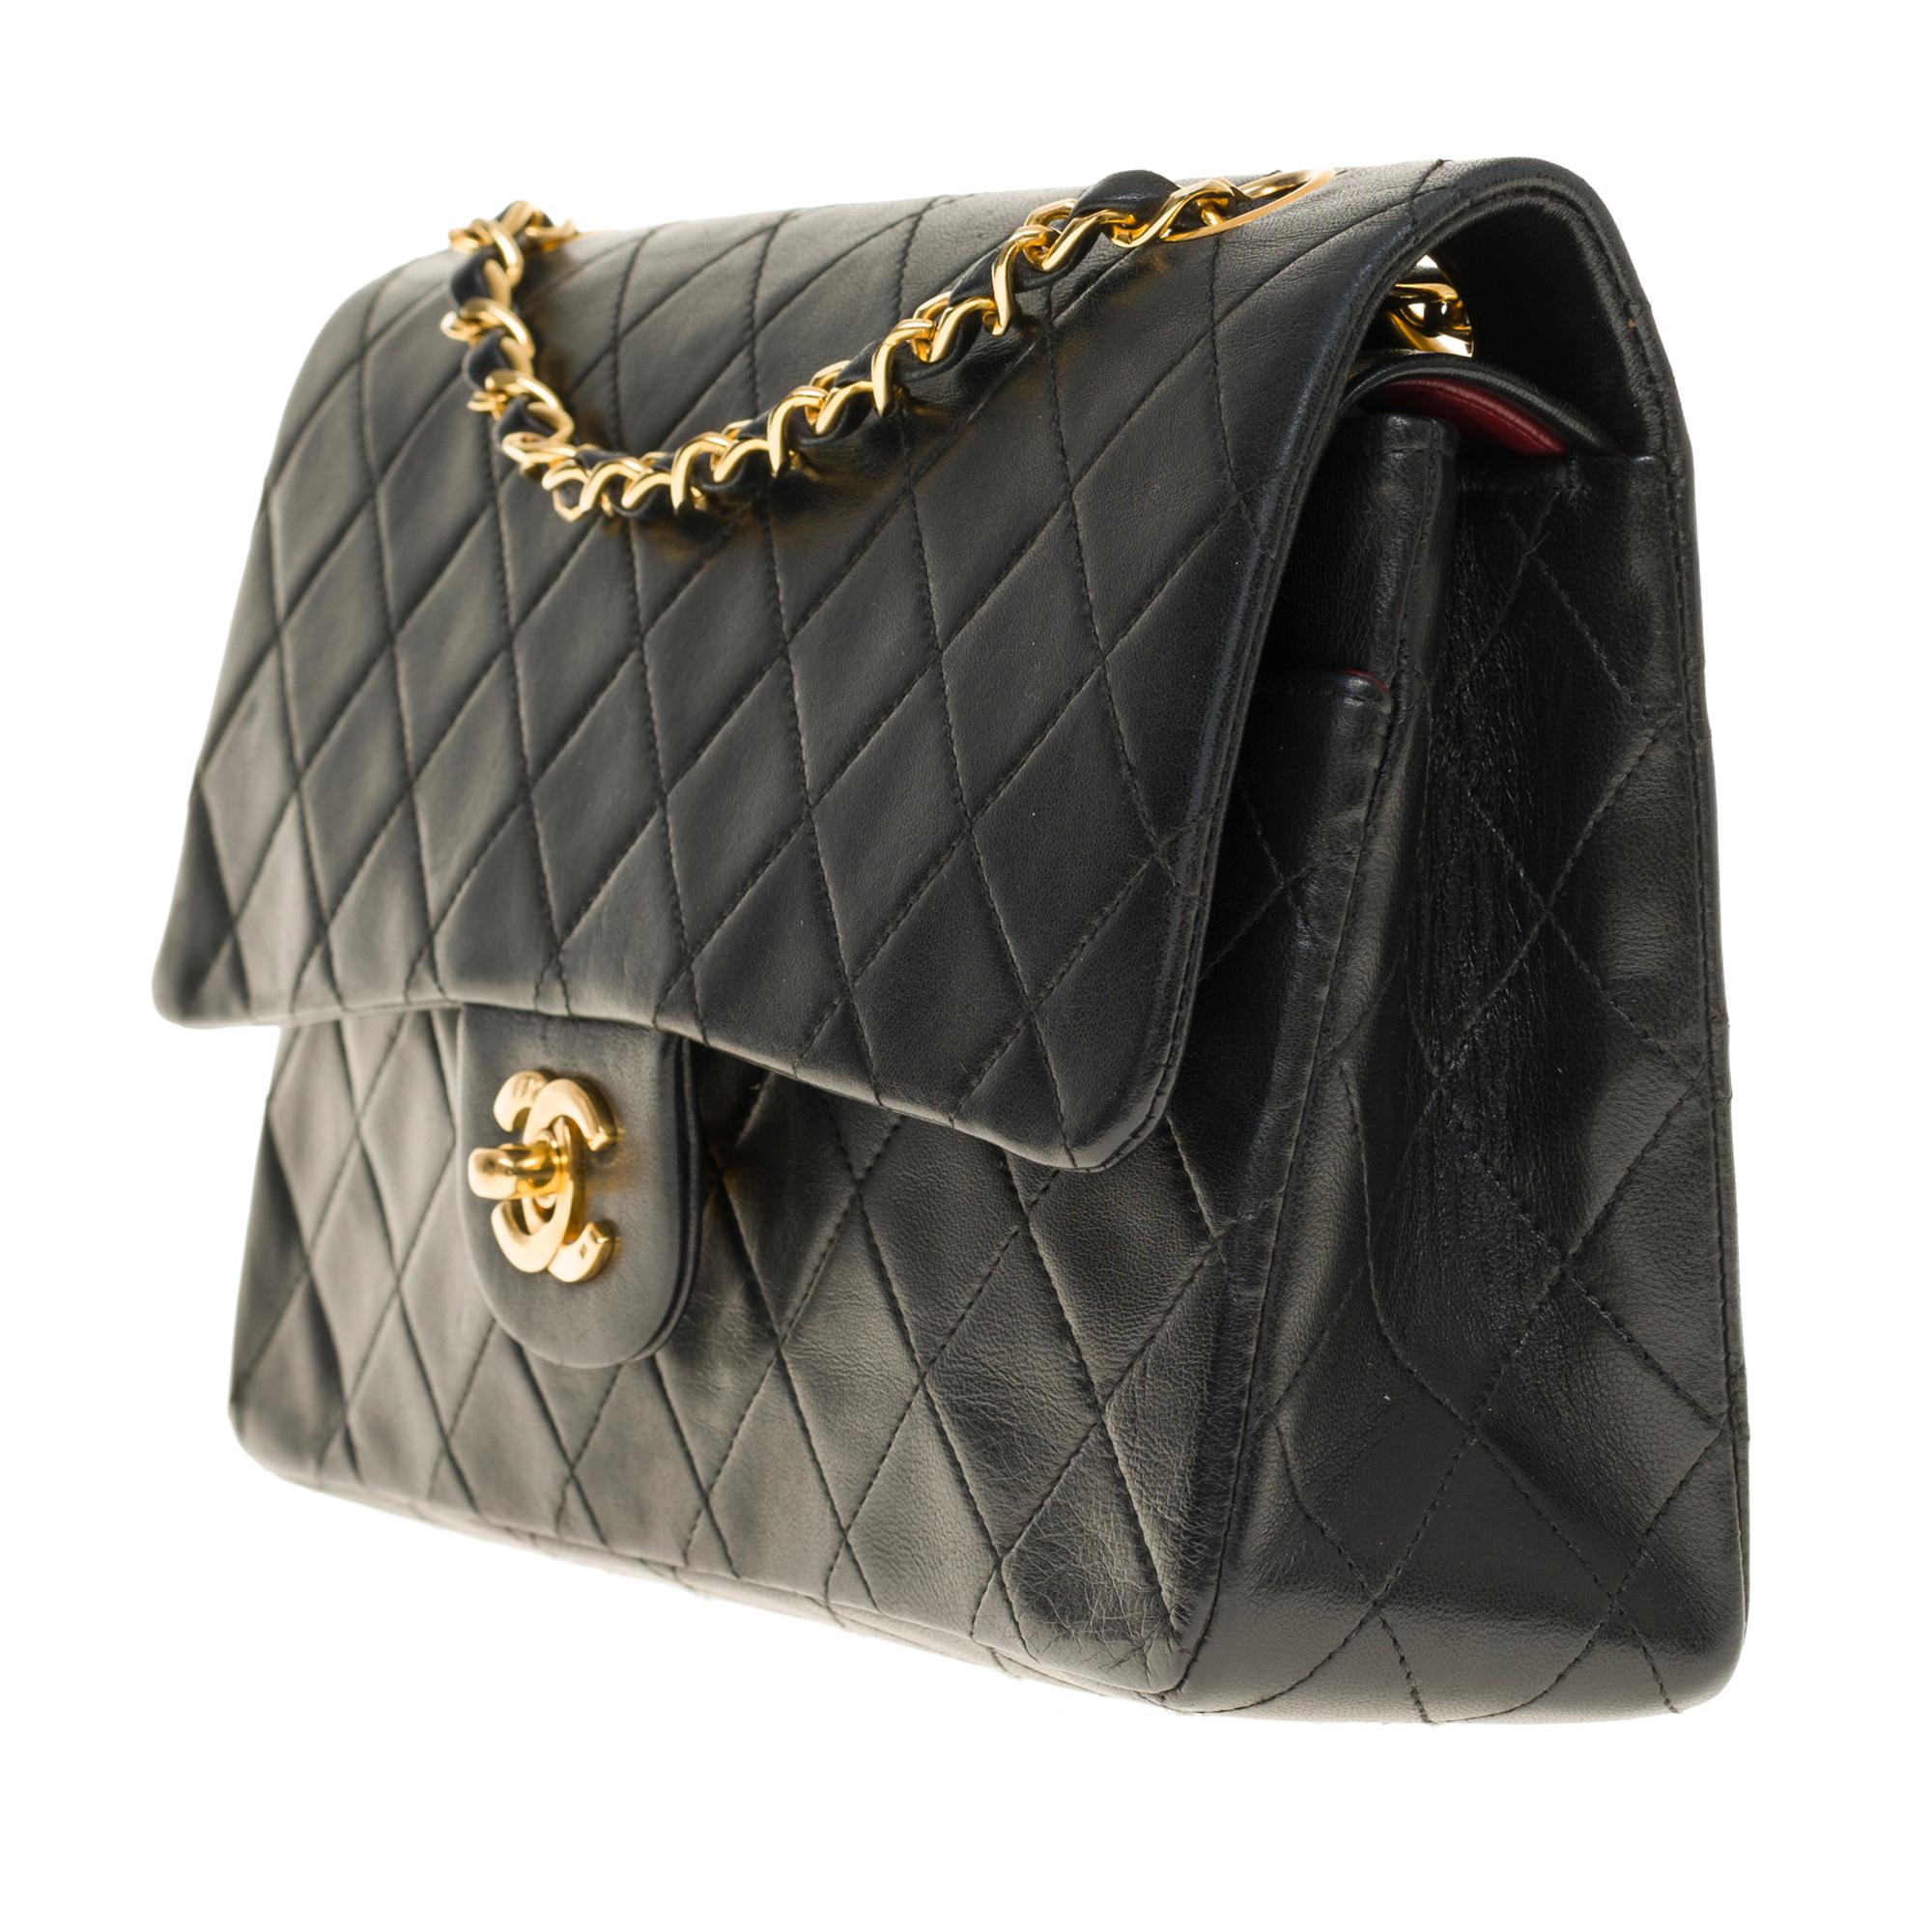 Black The Classy Chanel Timeless Medium Shoulder bag in black quilted lambskin and GHW